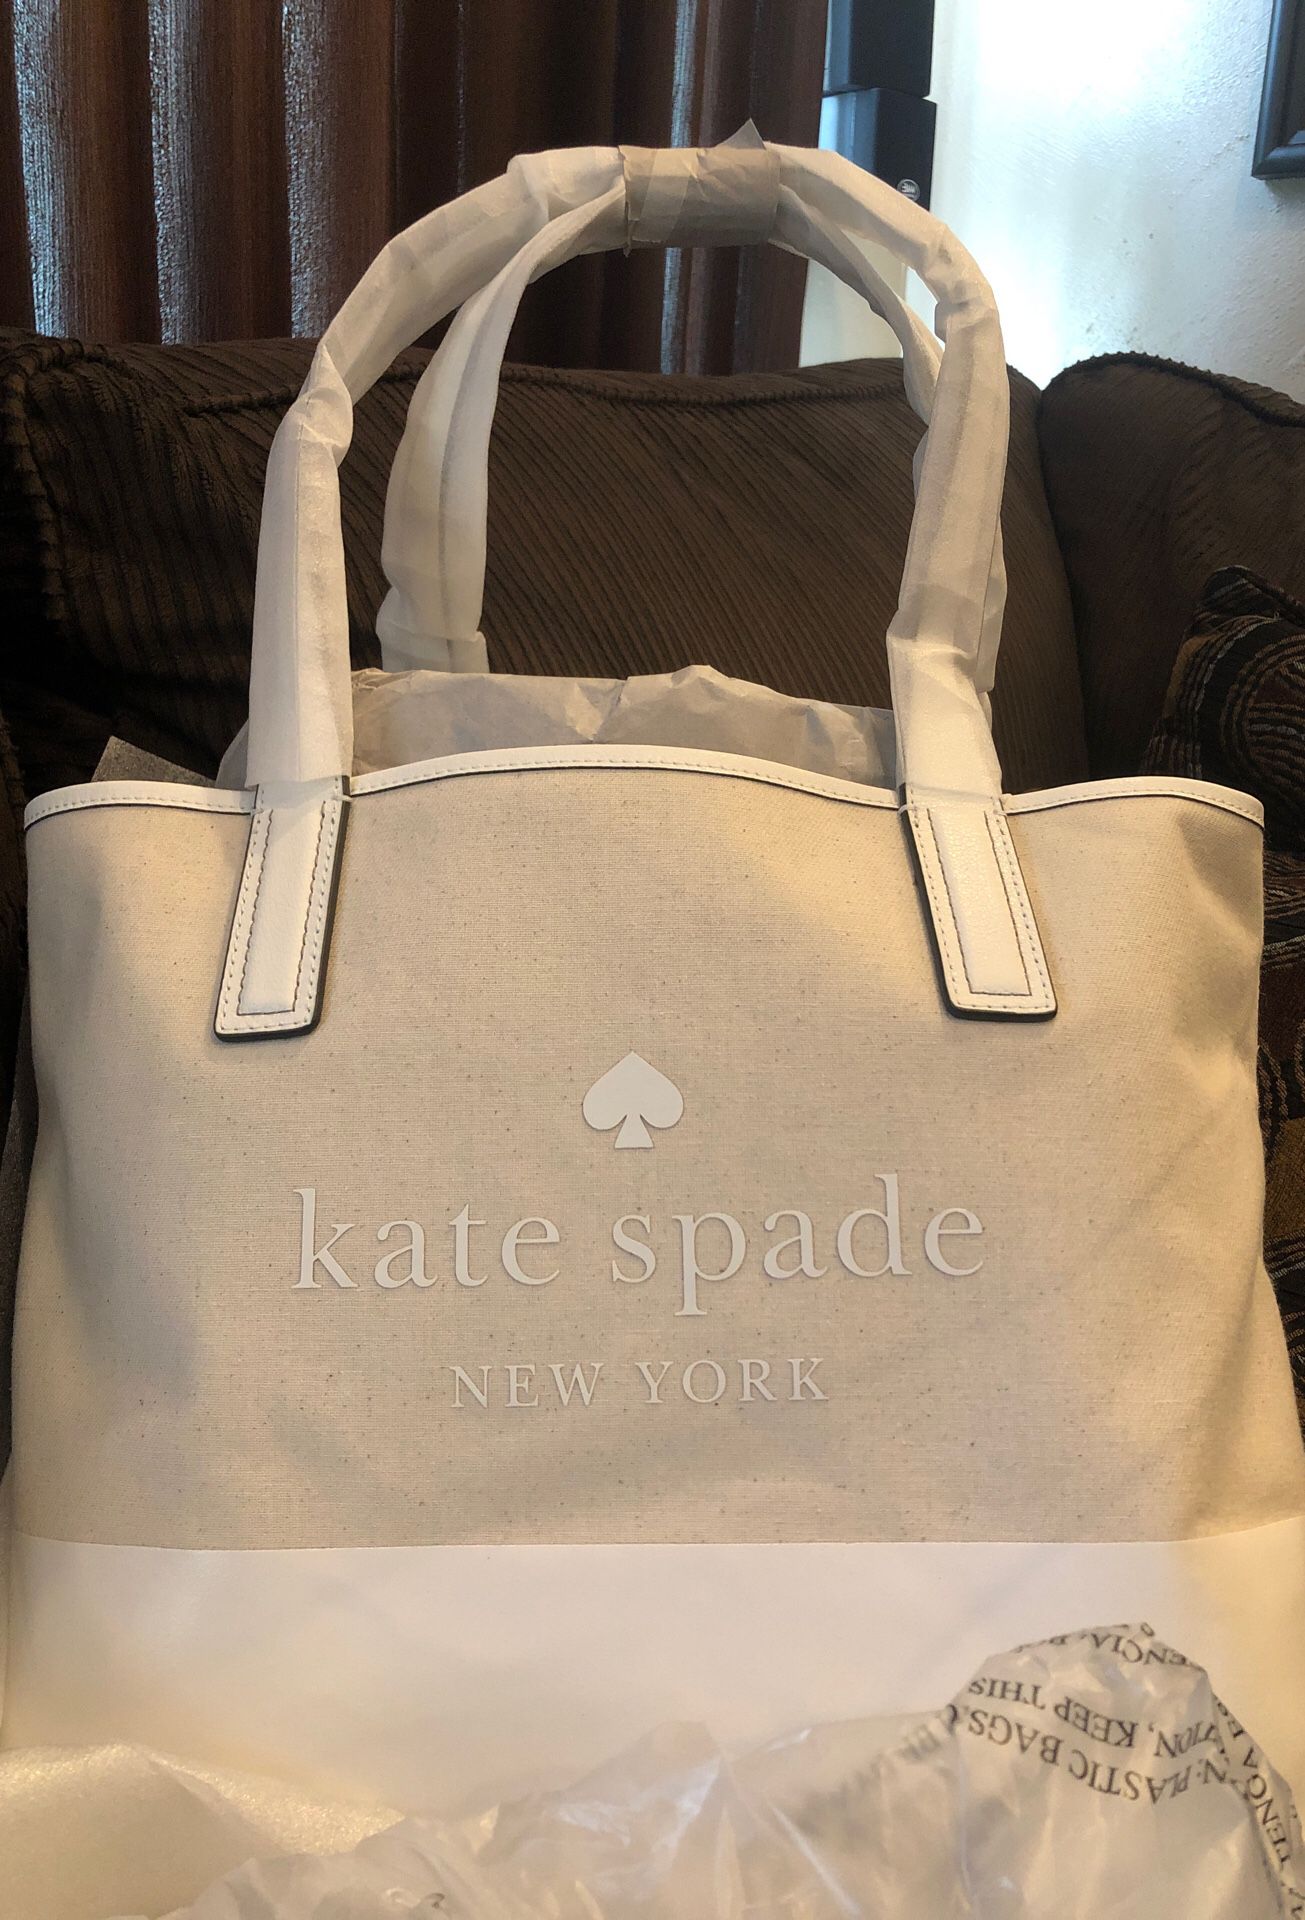 KATE SPADE BRAND NEW UNOPENED LARGE TOTE great for traveling or LAPTOP